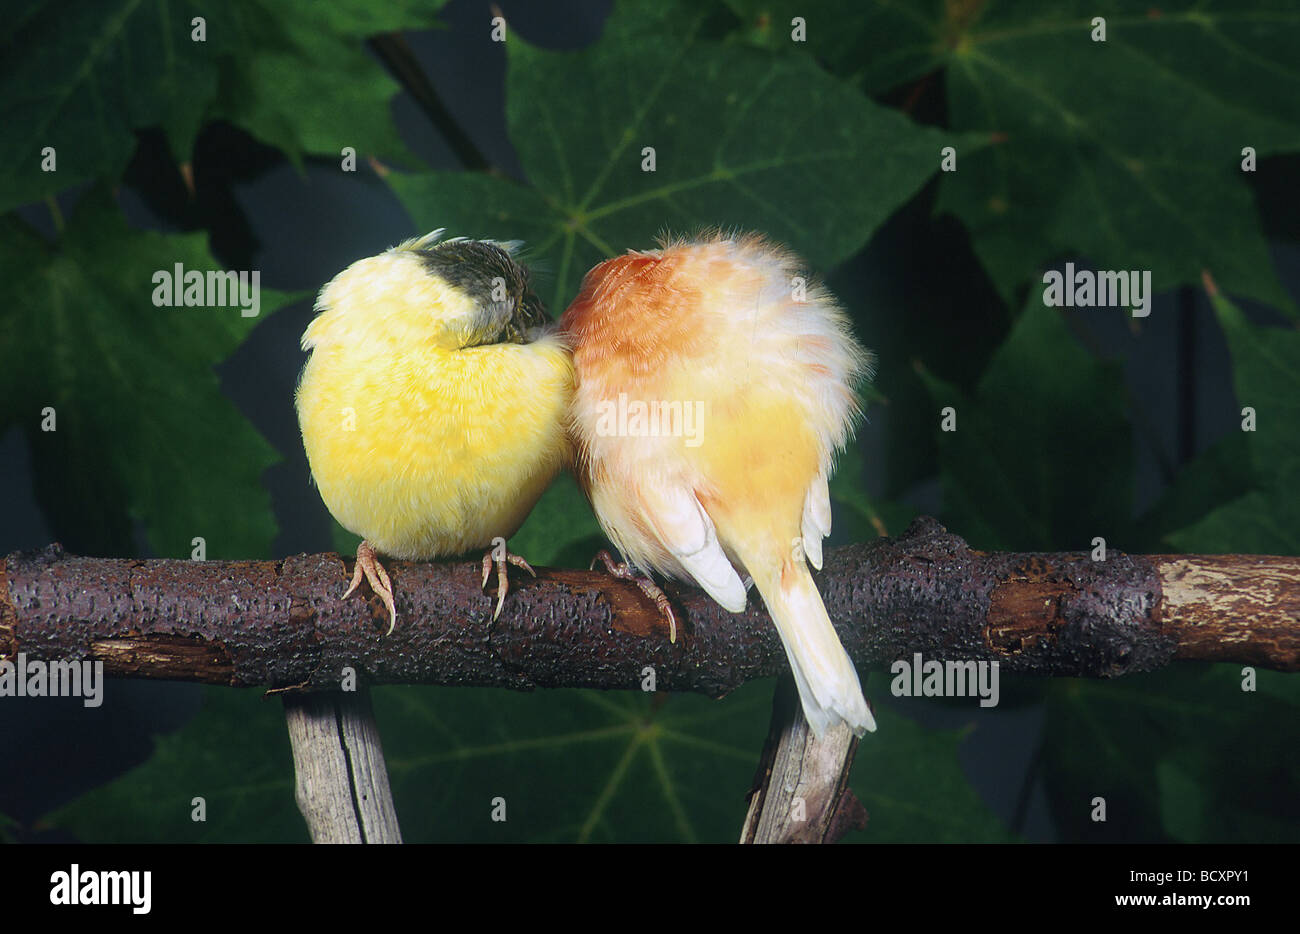 Domestic canaries (Serinus canaria forma domestica). Two birds perched on a twig while sleeping Stock Photo